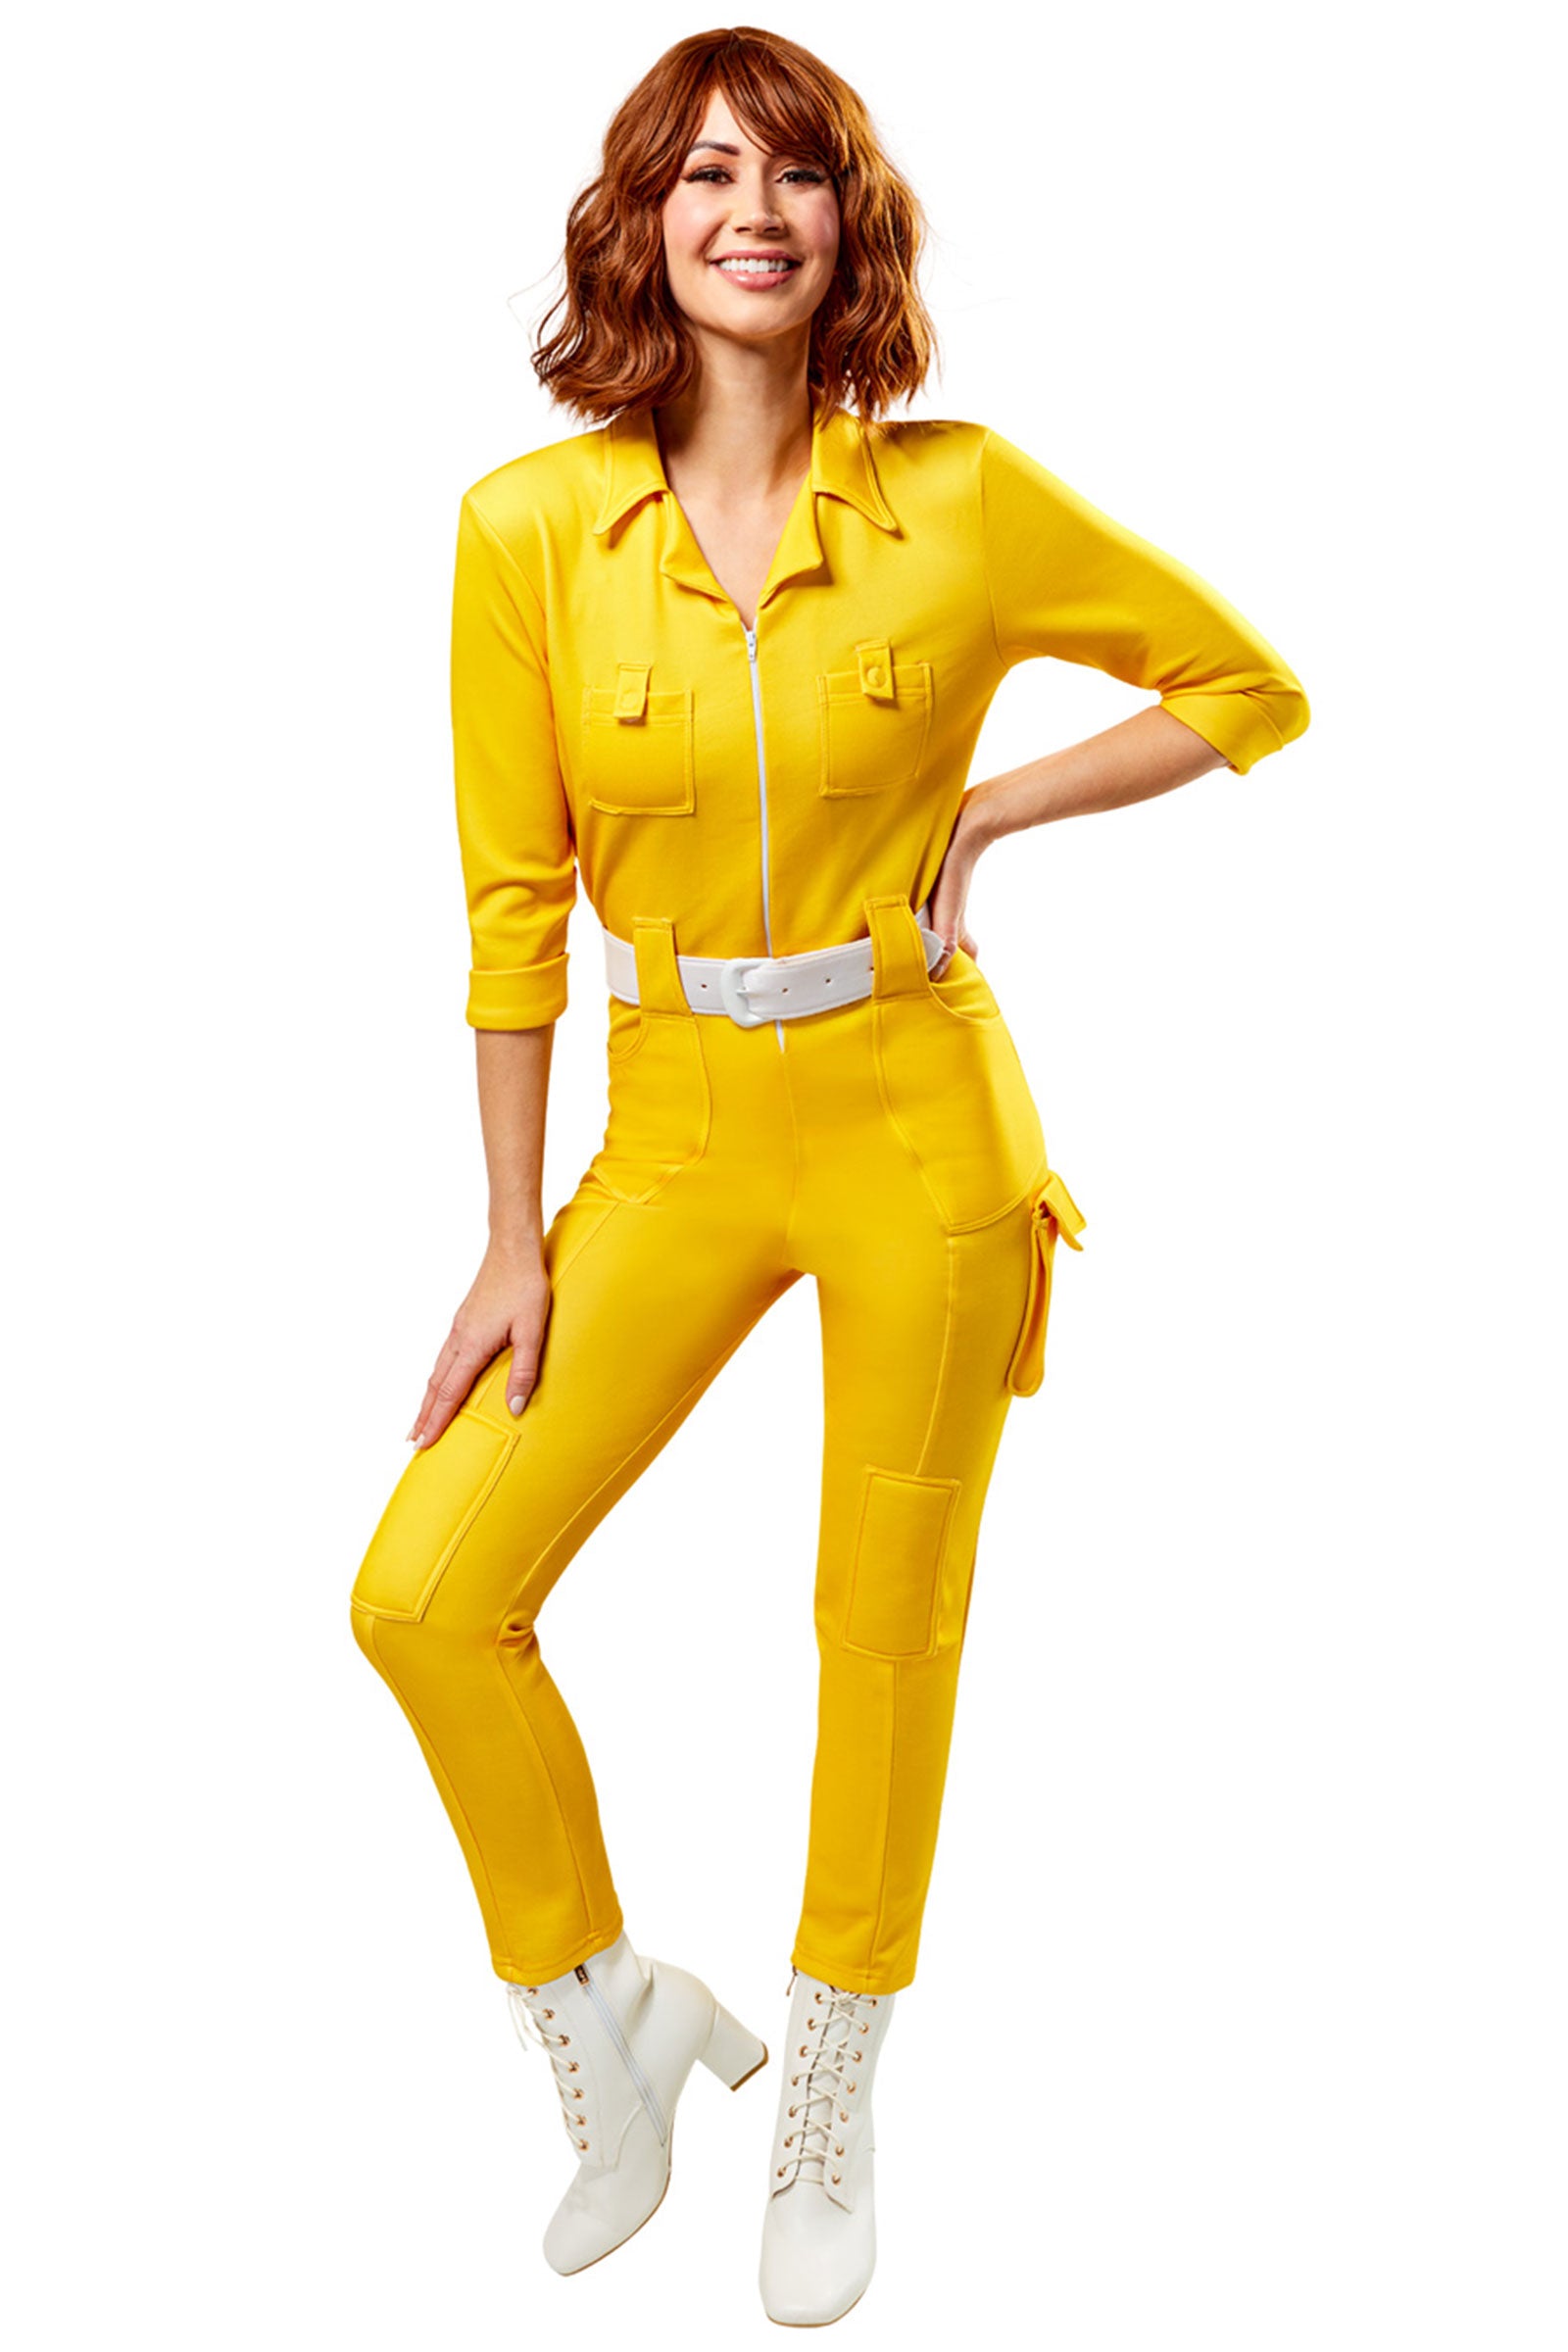 April O'Neil Deluxe Adult Costume